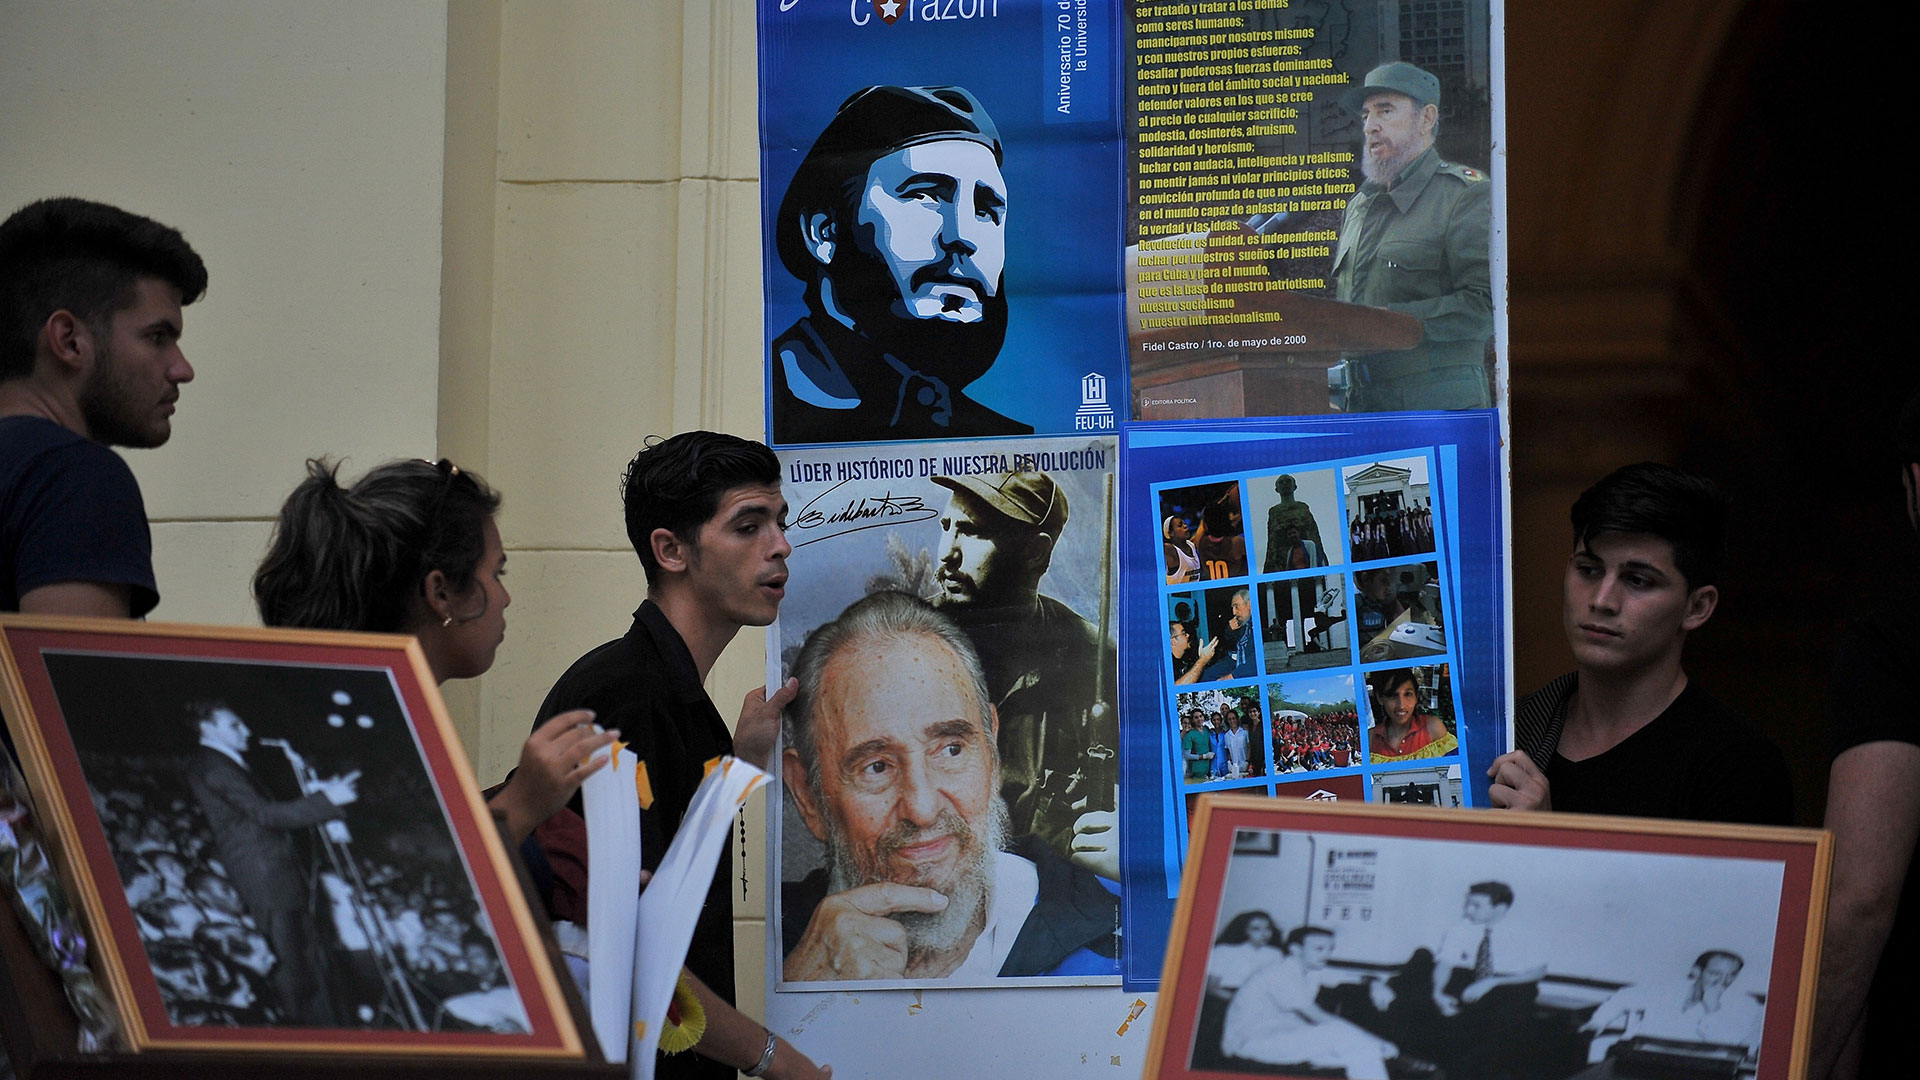 Cubans look to future with hope, doubts after Fidel’s death